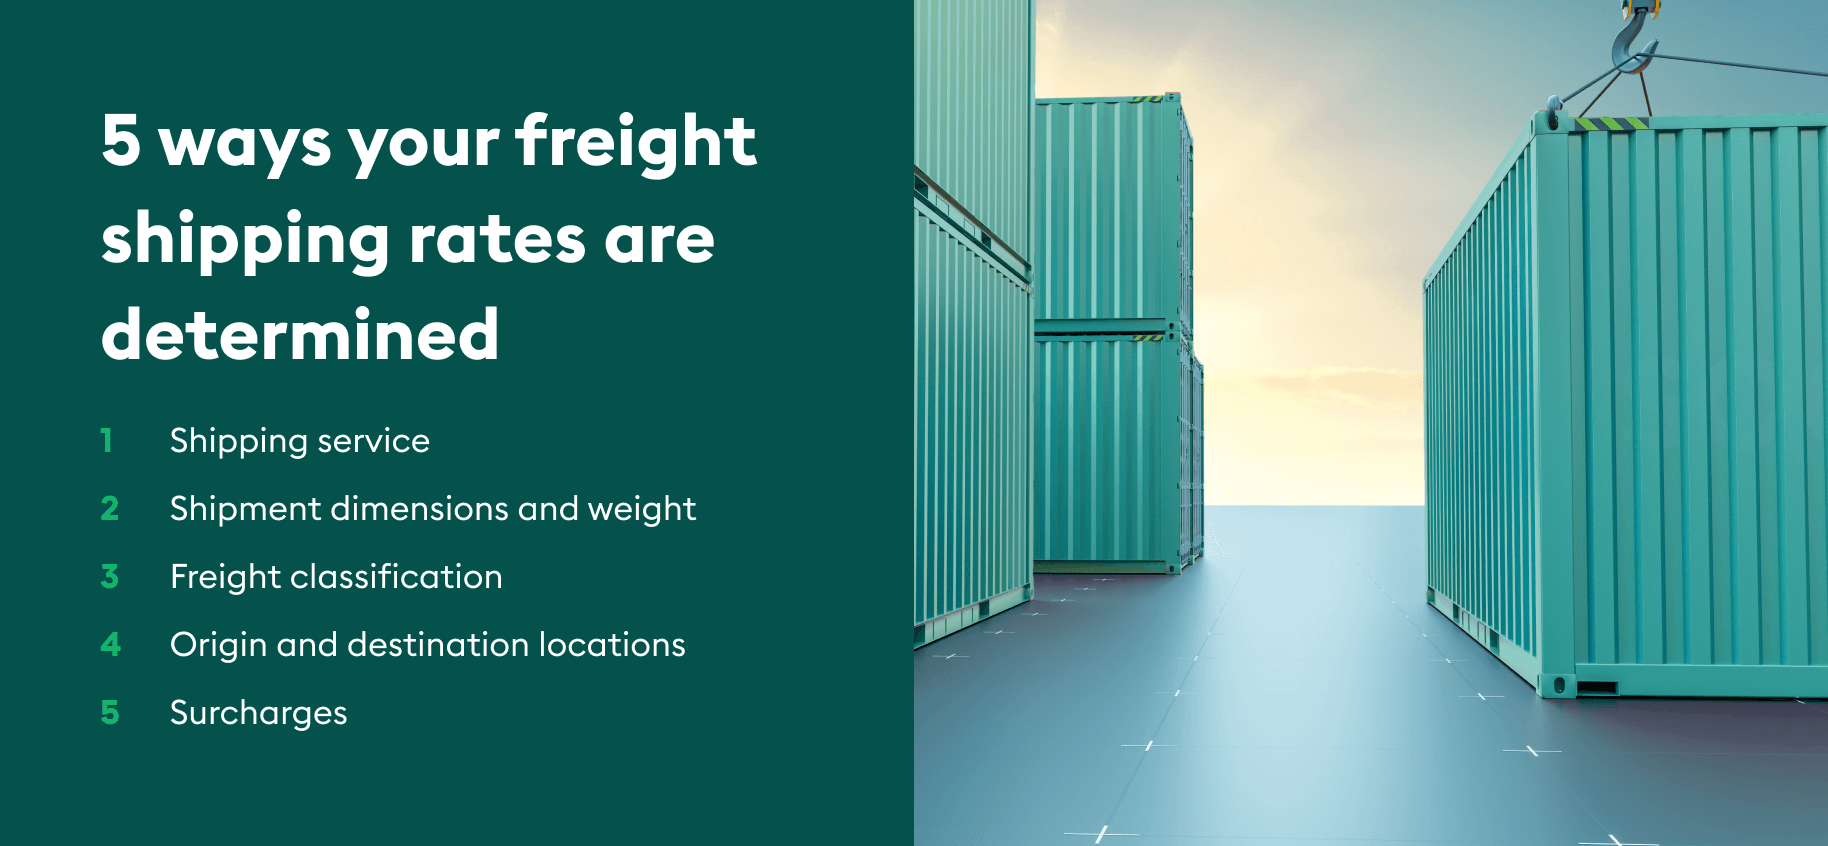 ways freight shipping rates are determined